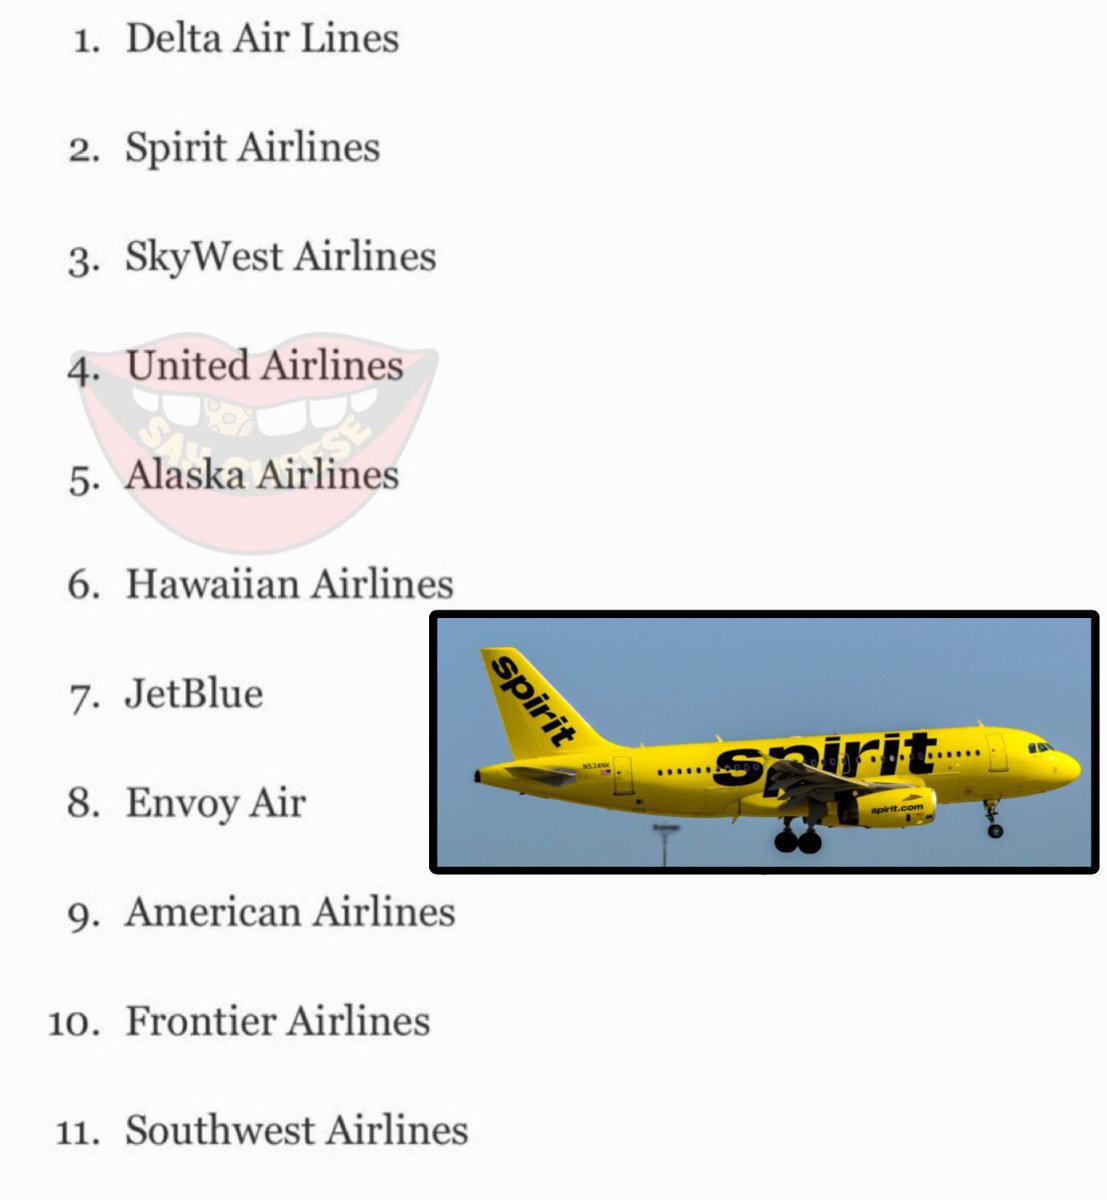 RT @SaycheeseDGTL: According to Forbes, Spirit is the 2nd best airline in the US. Delta is 1st & Southwest is last. https://t.co/tLYQ2gtRsk